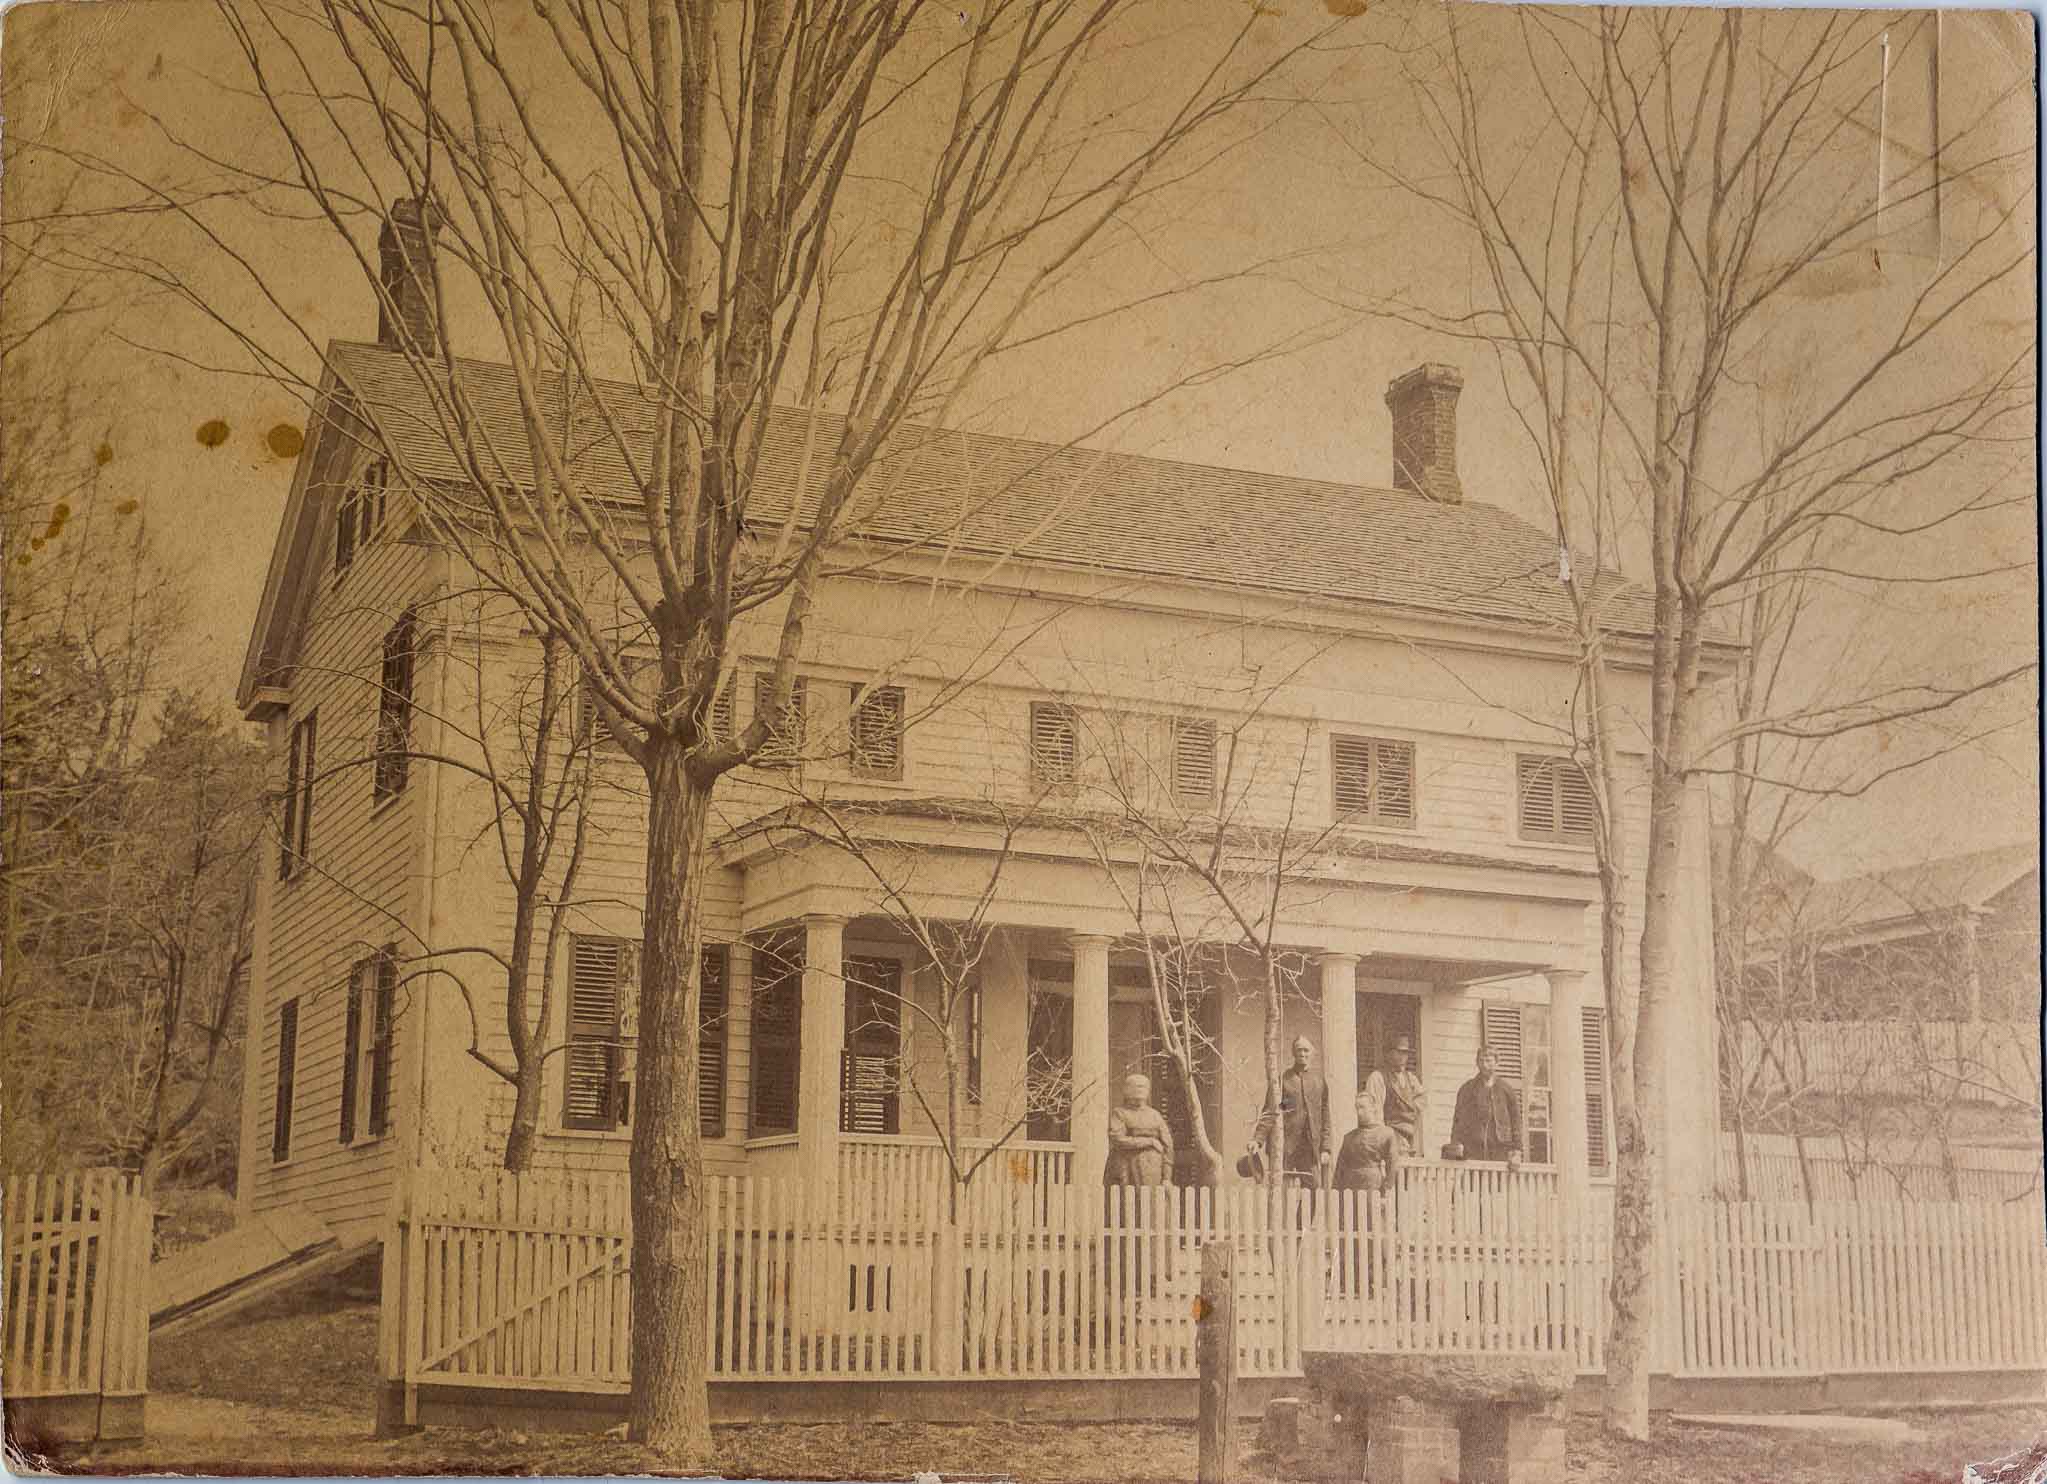 The Stewart Farm house and family